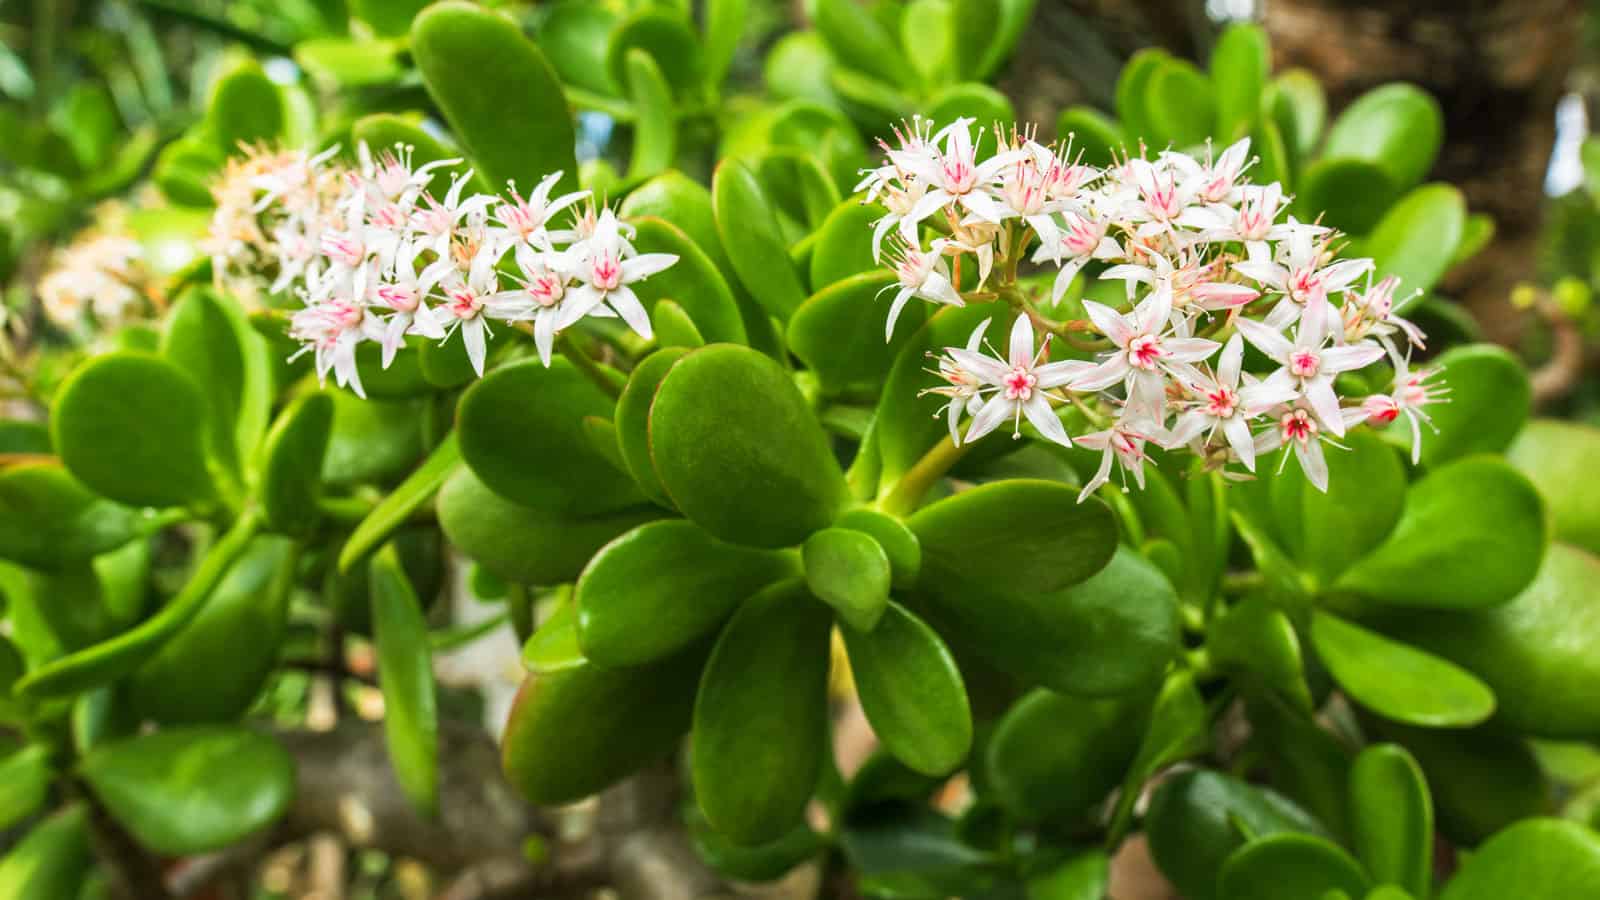 The blooming gorgeous flowers of a Jade Plant blooming brightly in the garden, 15 Stunning Succulent Flowers You've Probably Never Seen Before - 1600x900